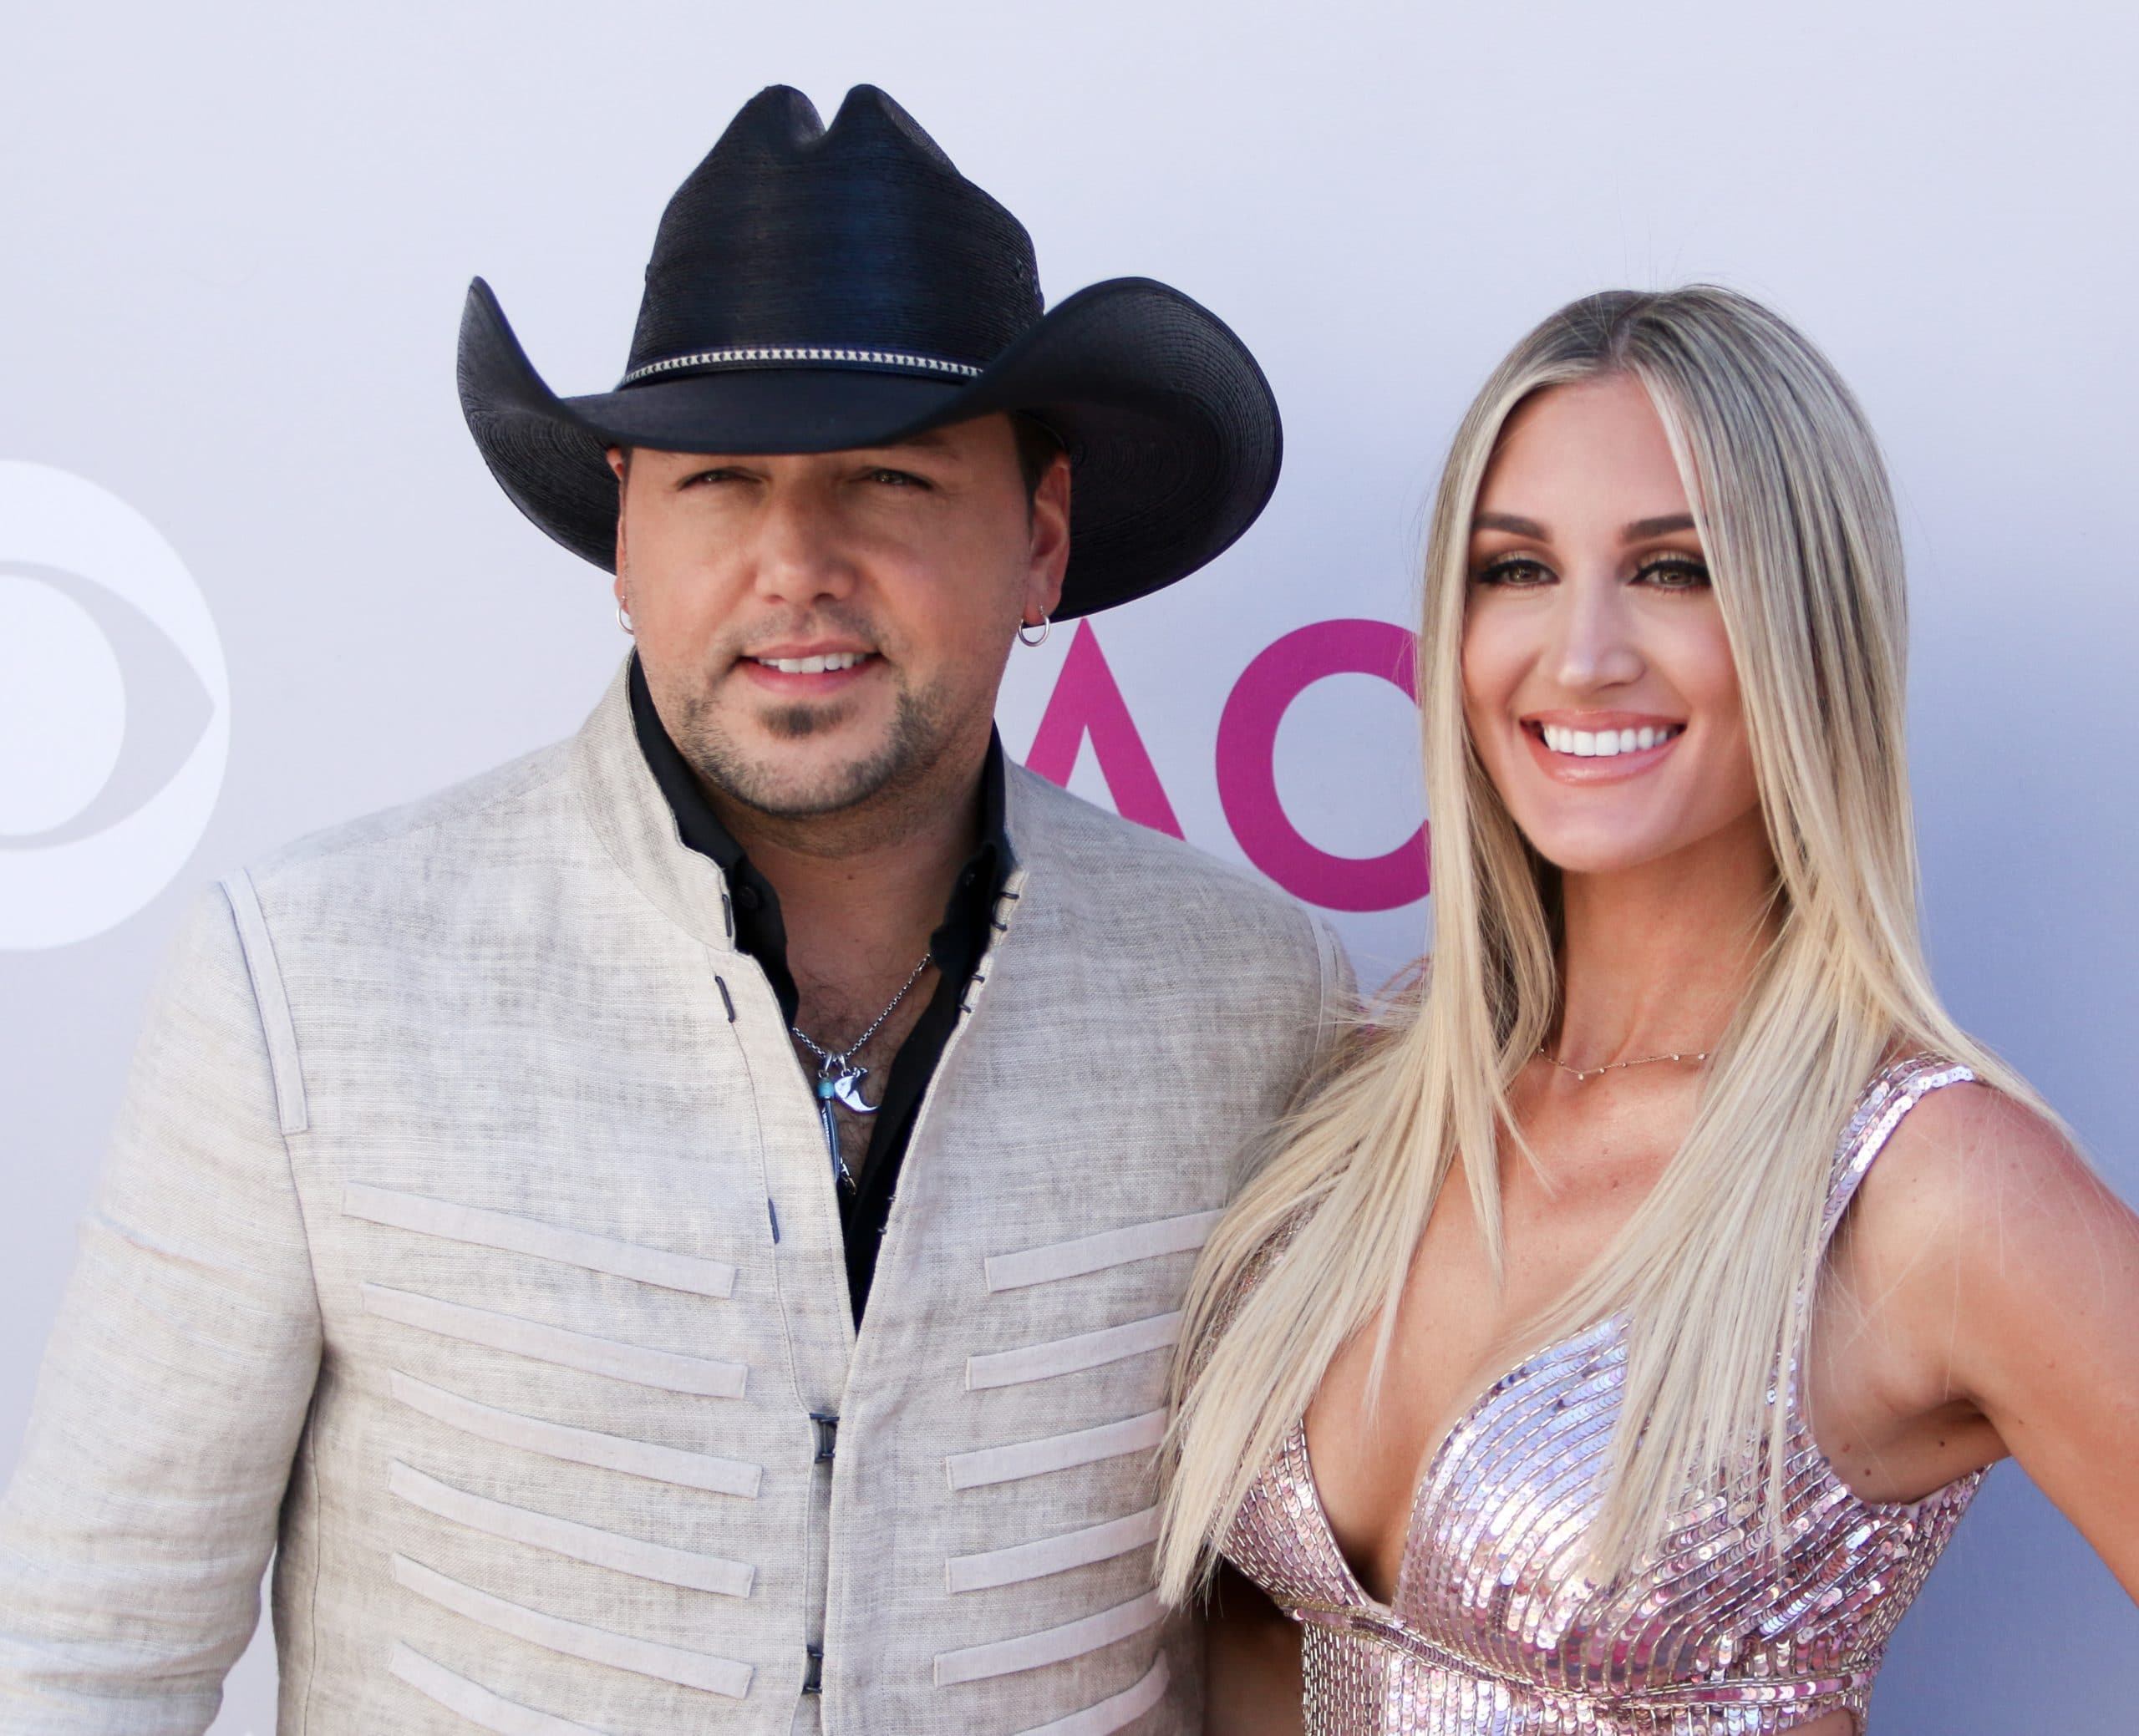 Jason Aldean (L) and wife Brittany Kerr